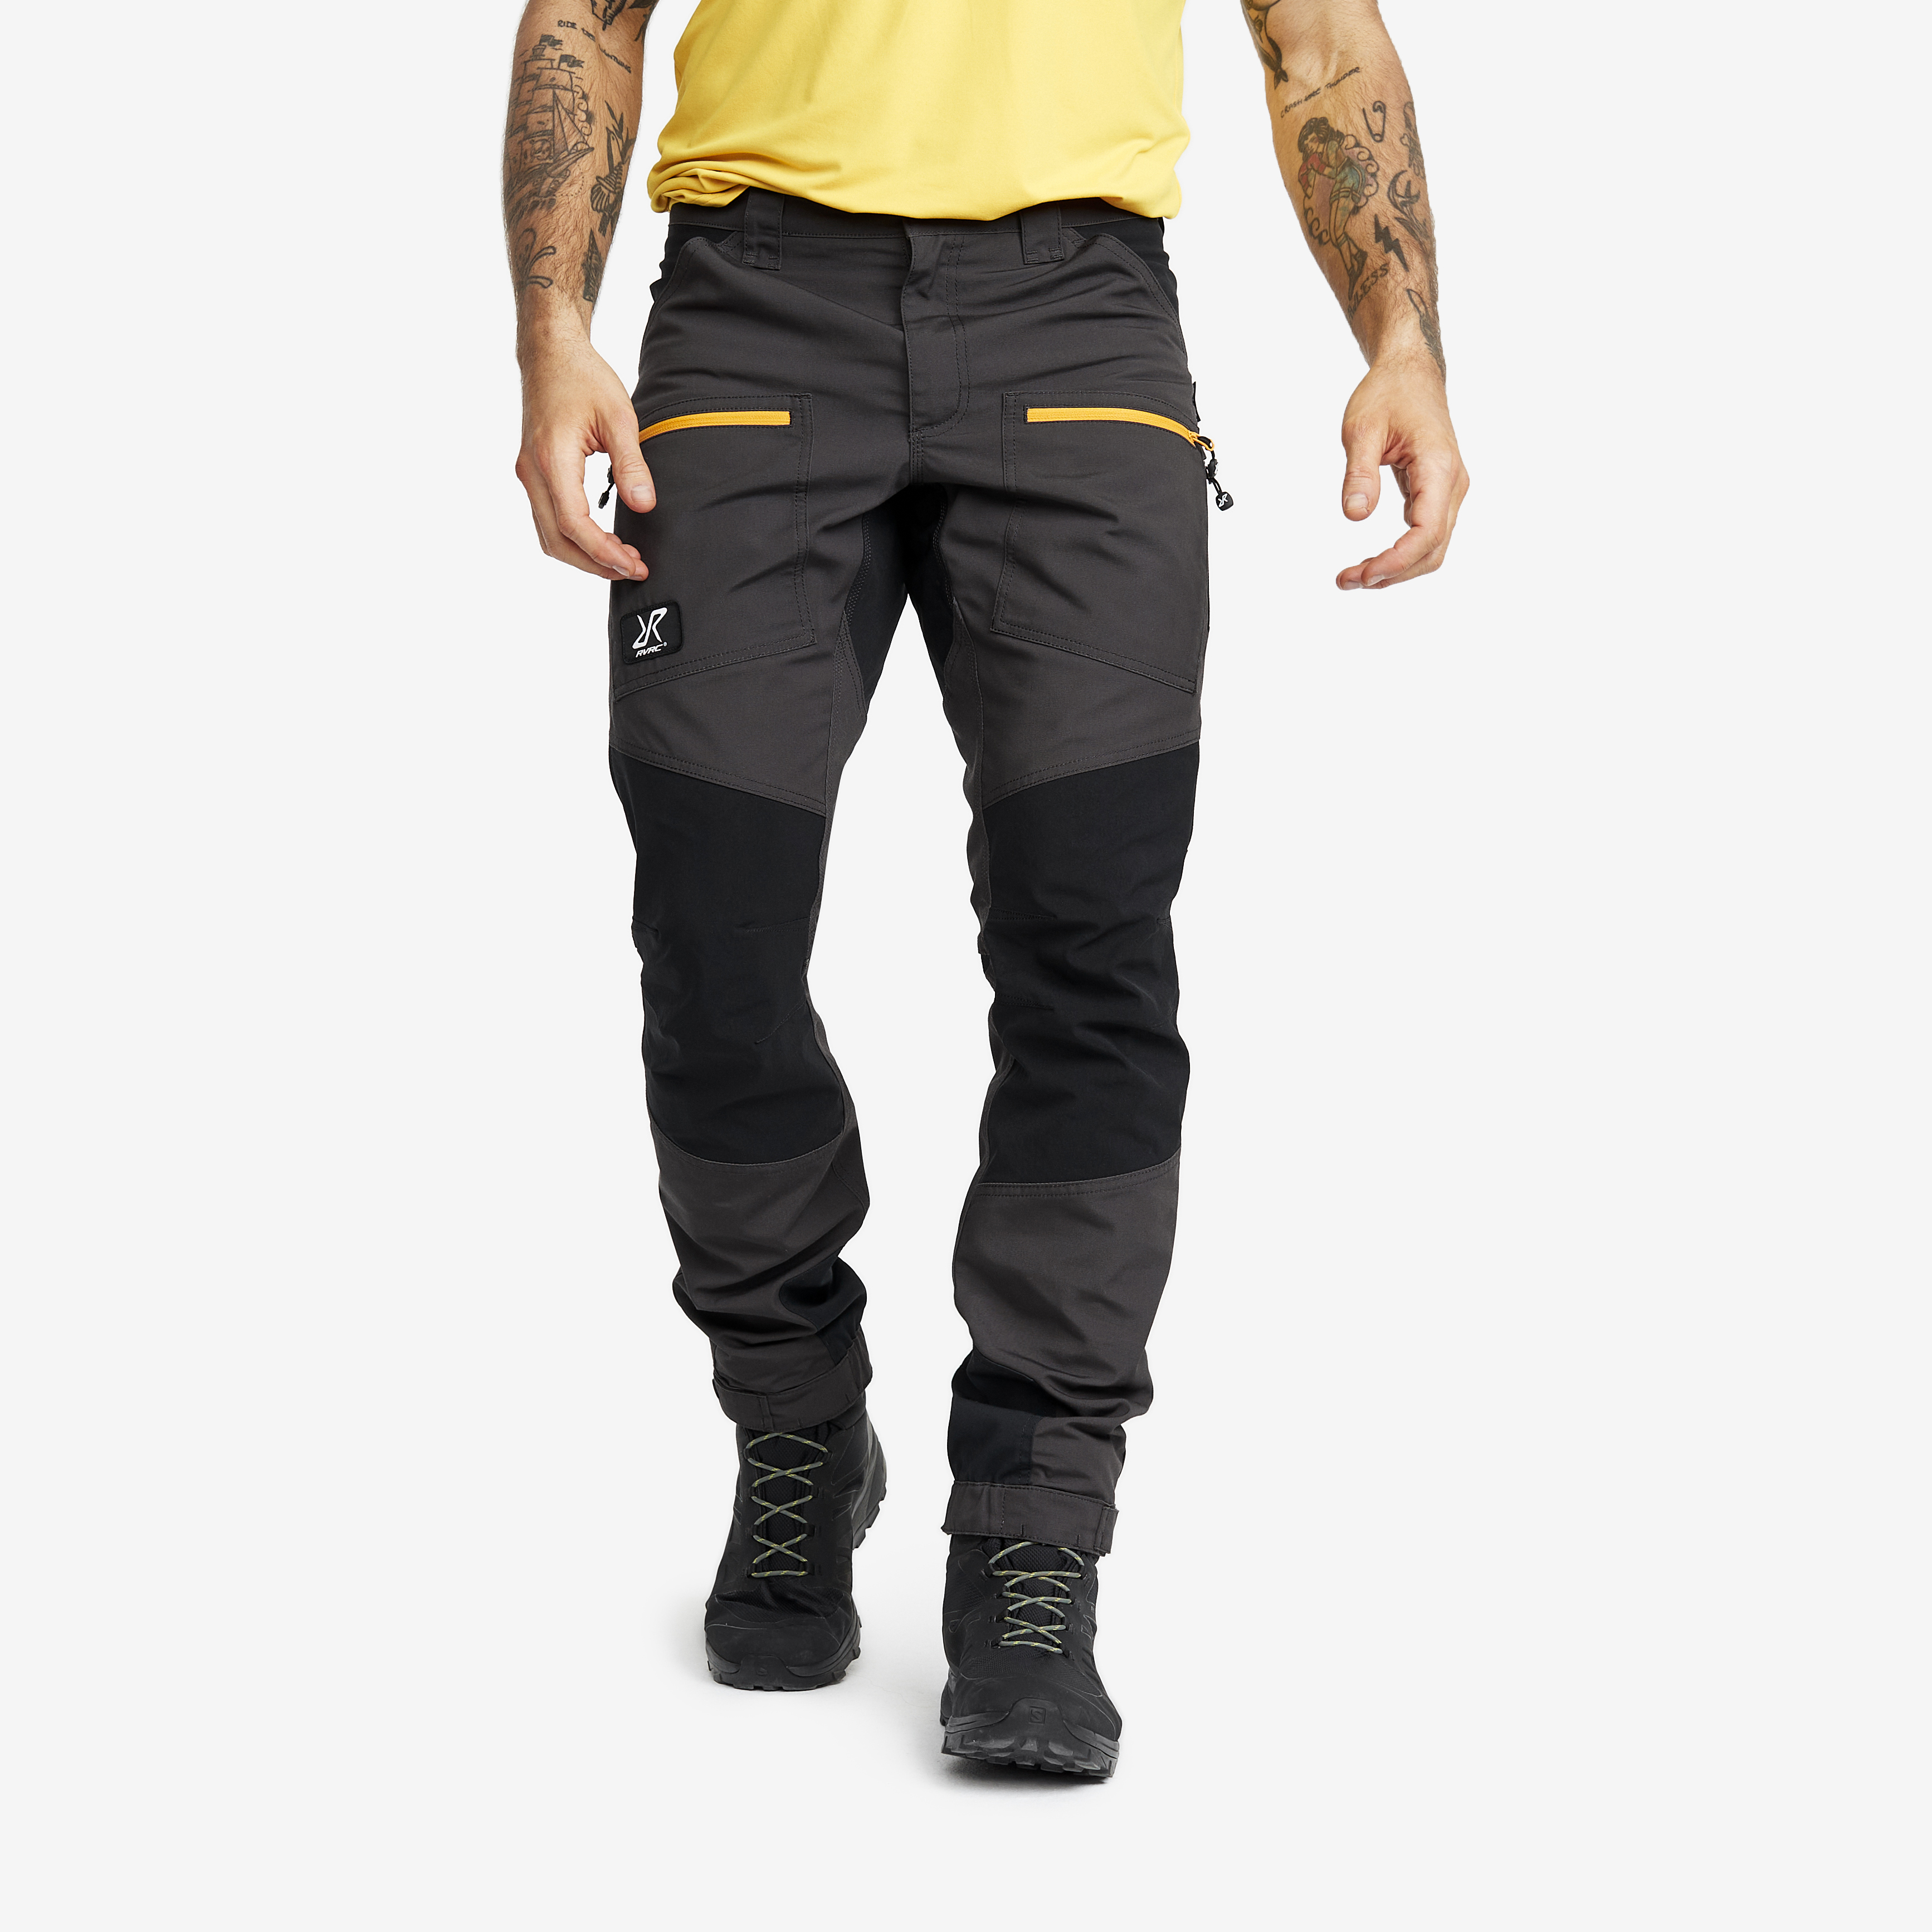 Nordwand Pro Trousers Anthracite/Radiant Yellow Men